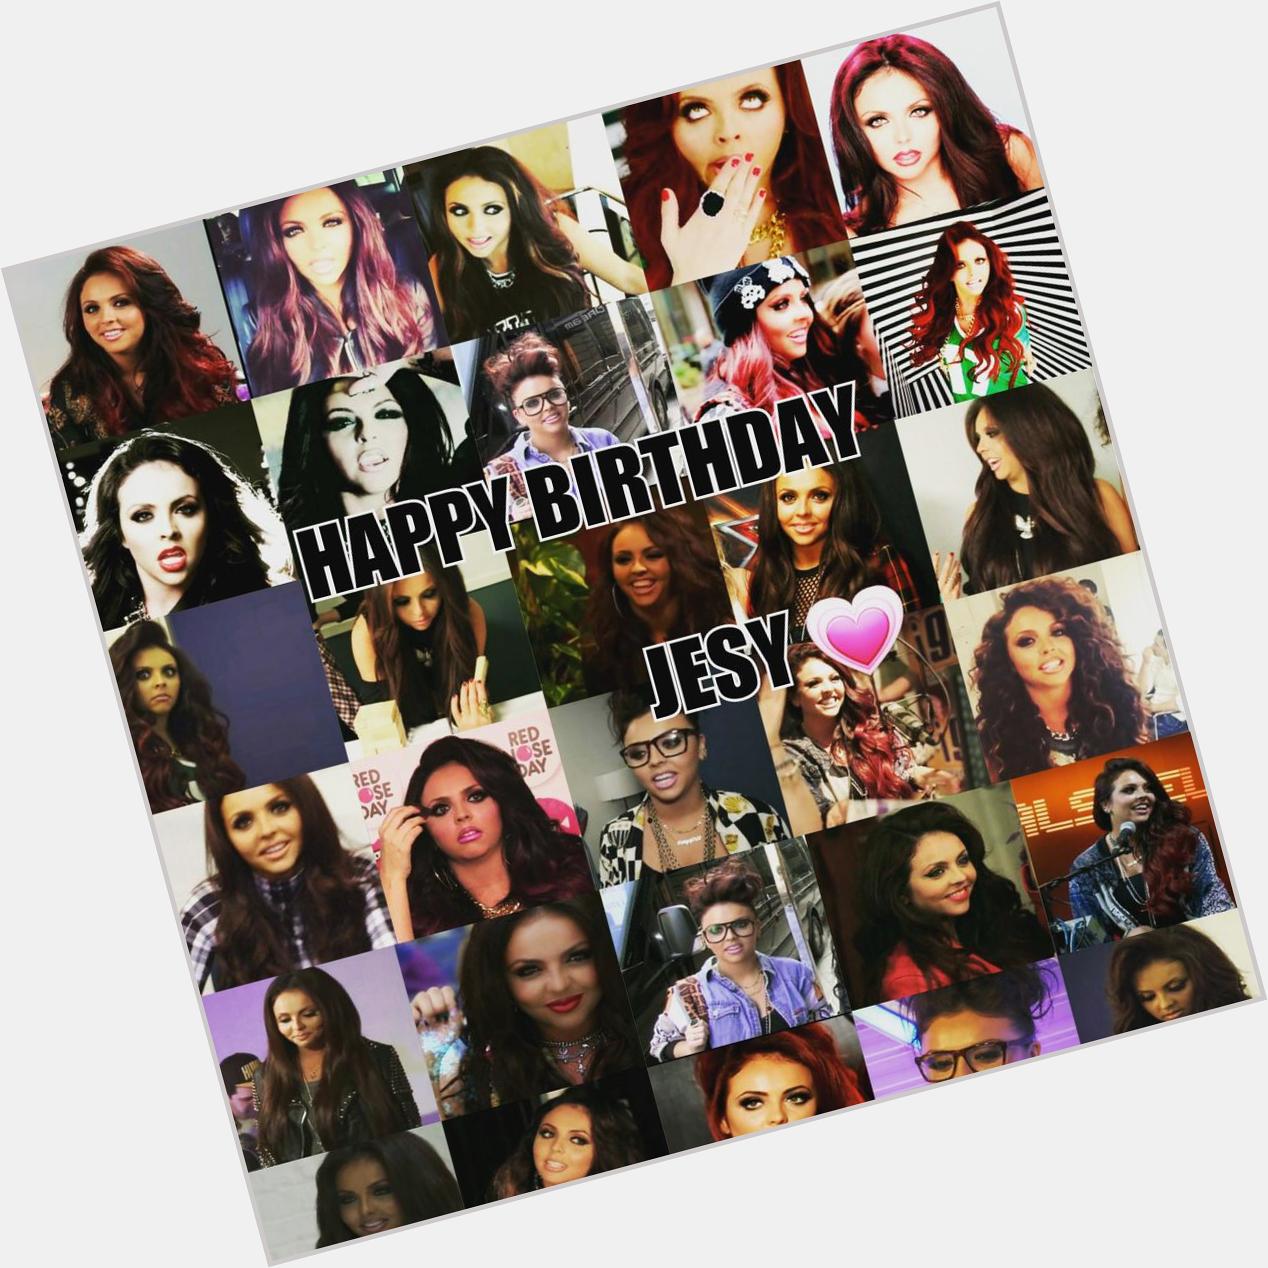 Happy birthday jesy nelson. I love you so much, you thought me to not judge people. Thank you  